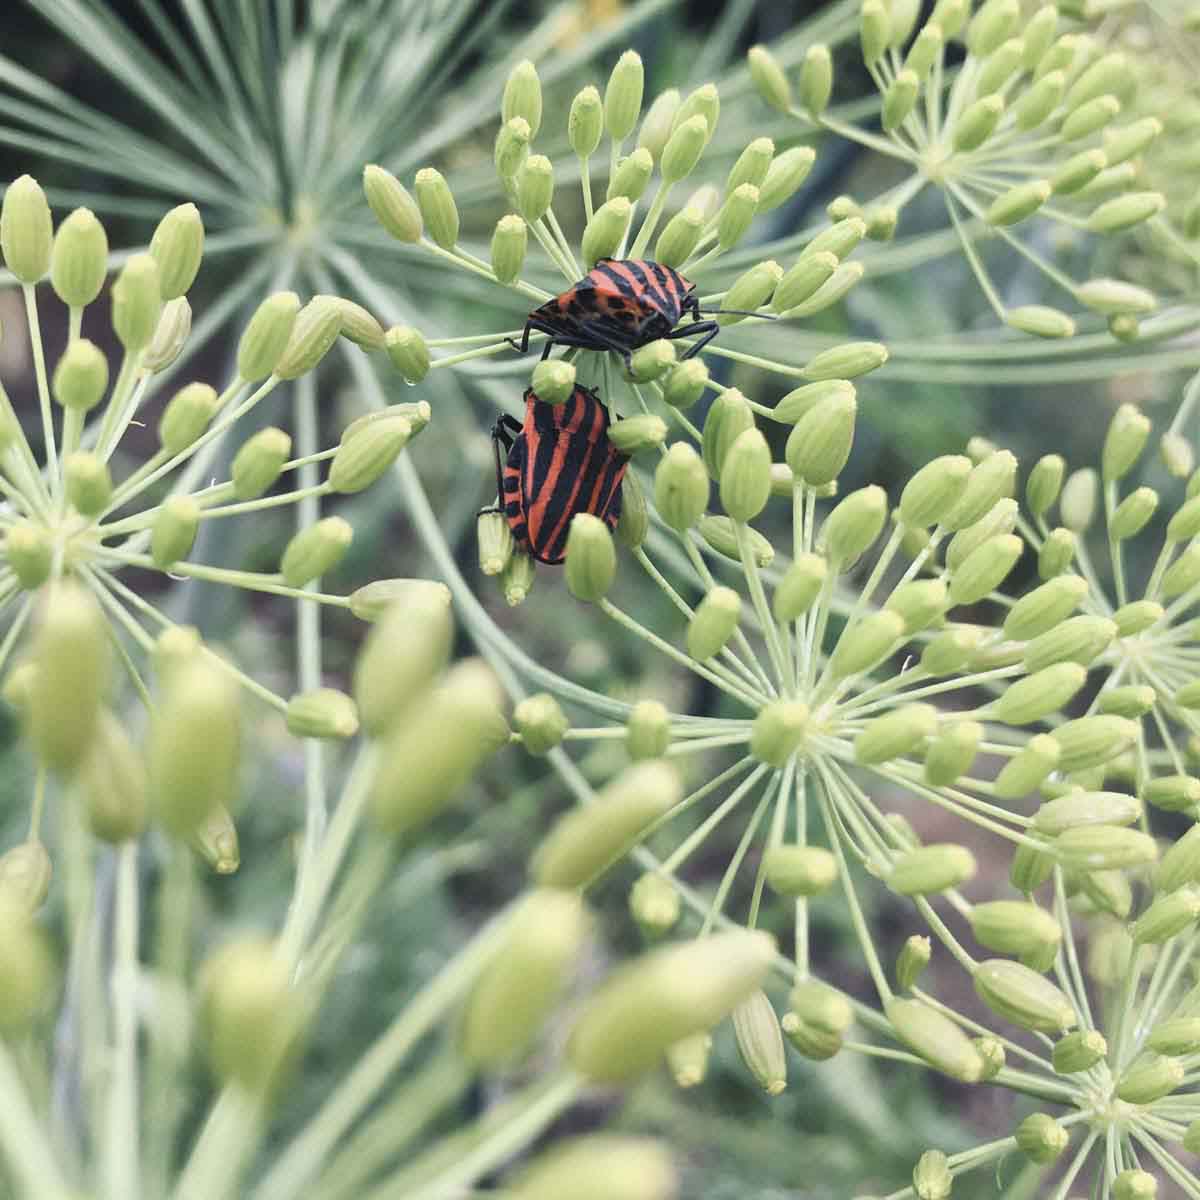 black and red beetles sitting on dill flower buds.